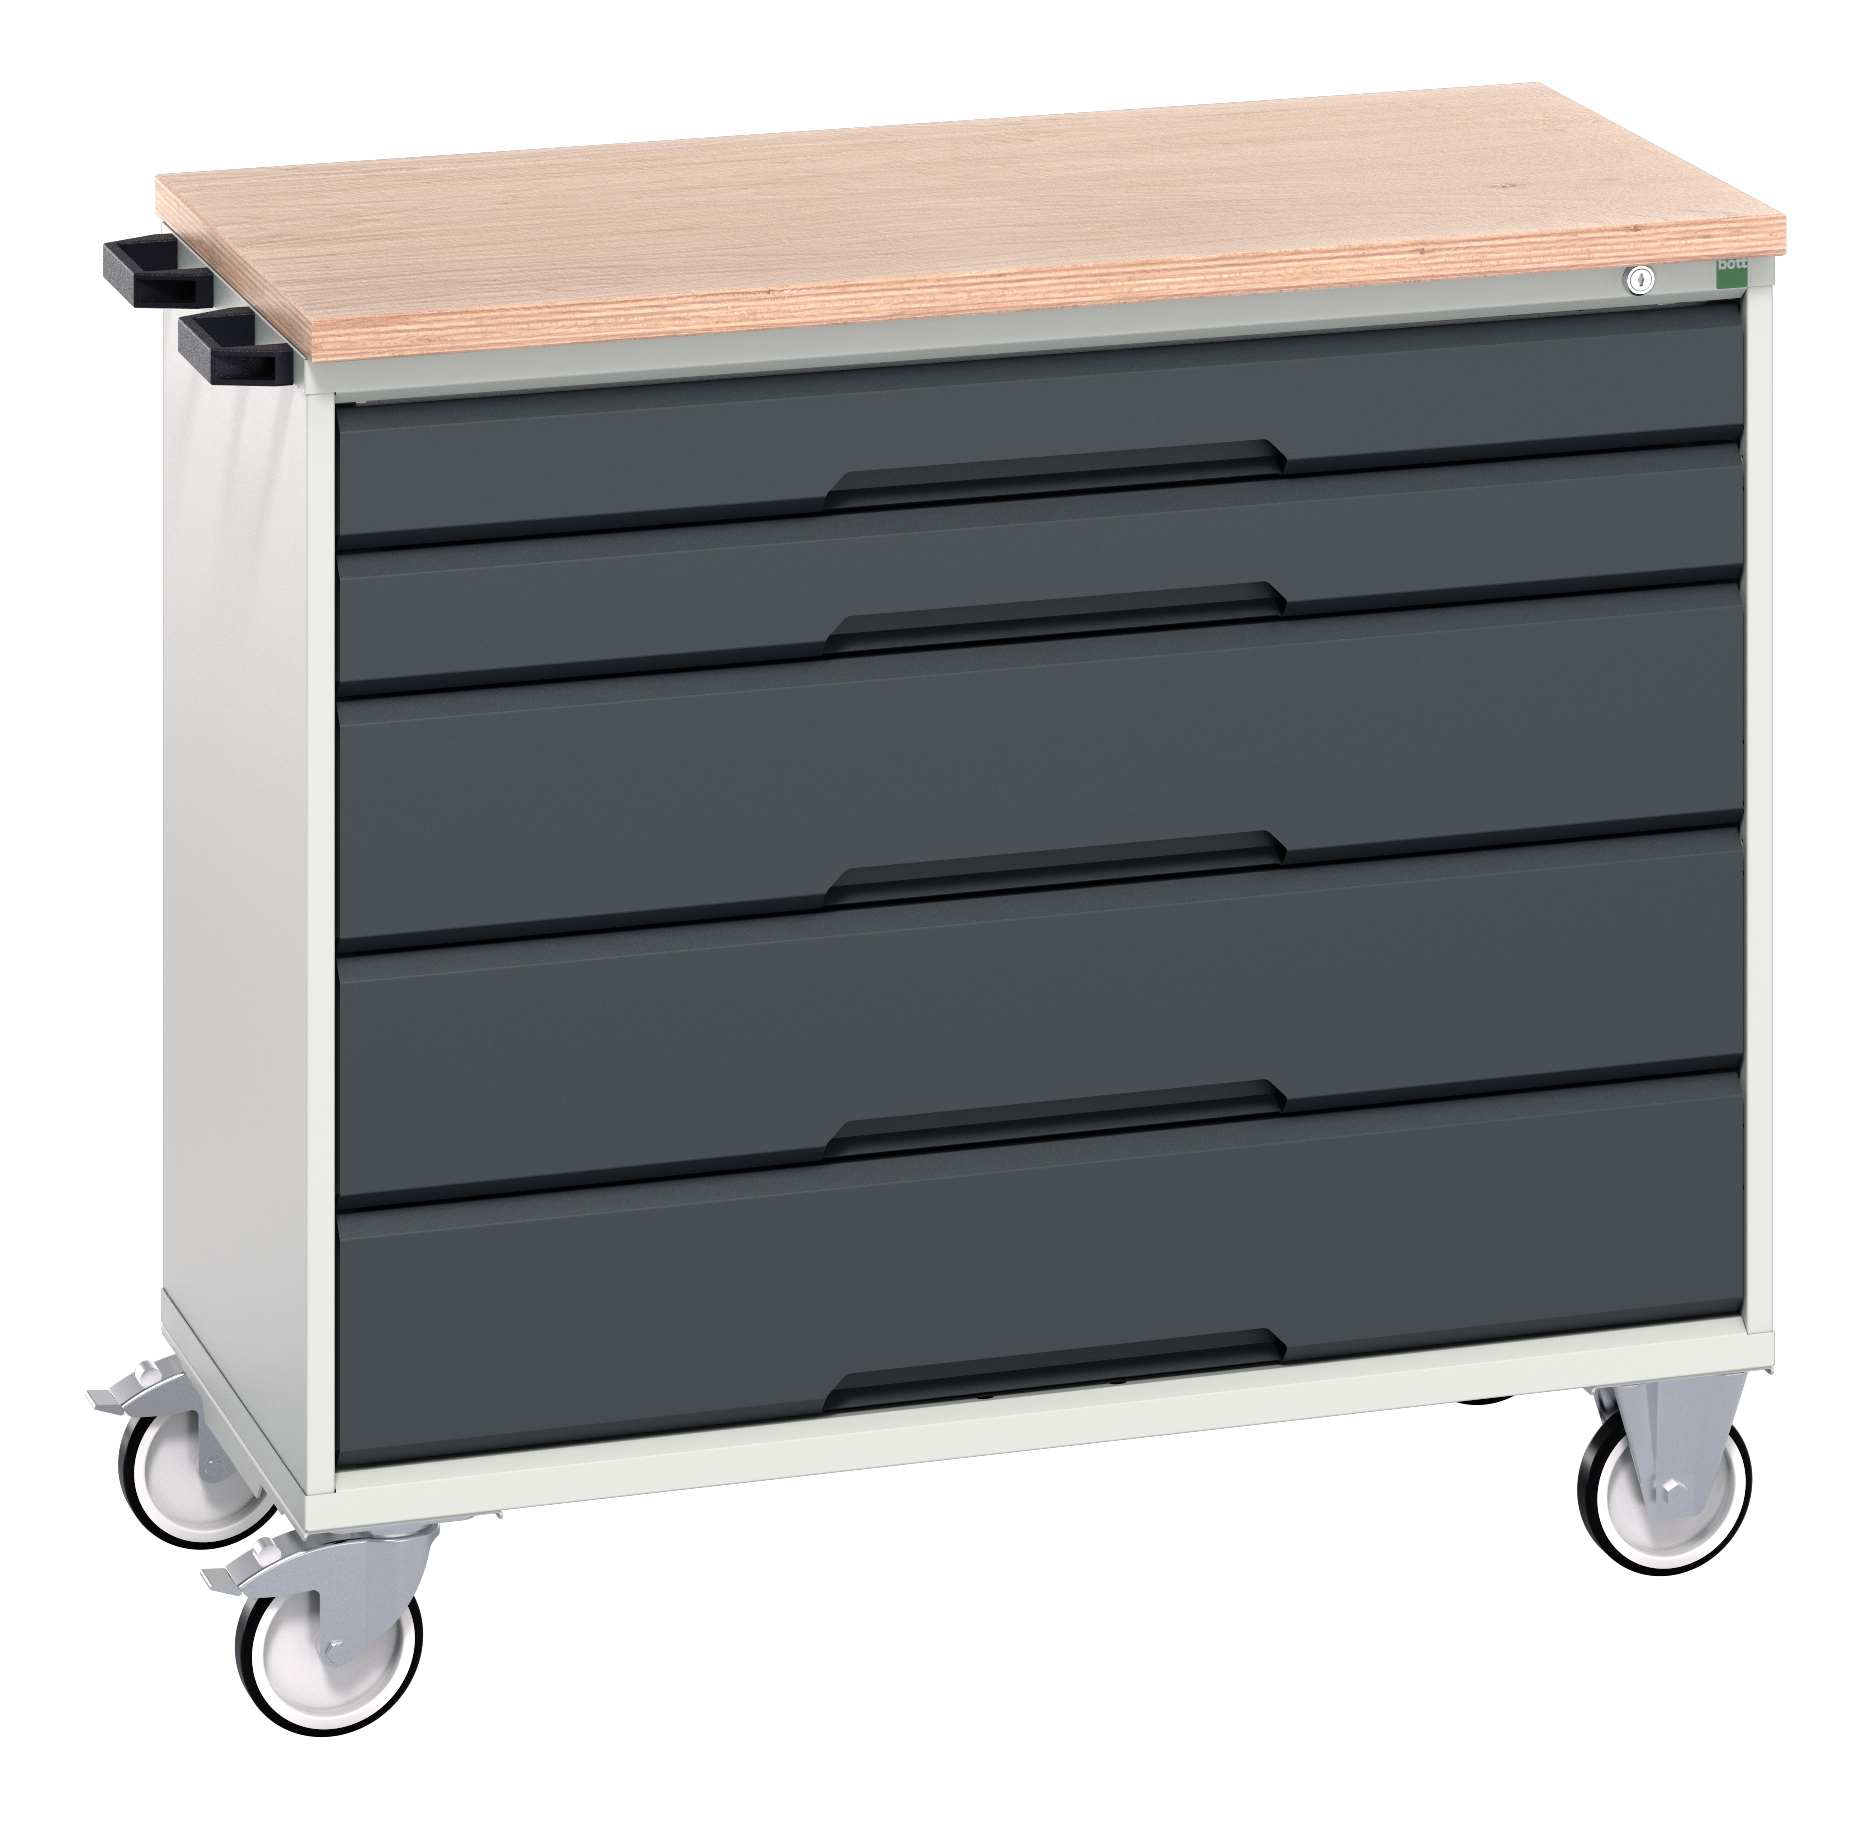 Bott Verso Mobile Drawer Cabinet With 5 Drawers & Multiplex Top - 16927051.19